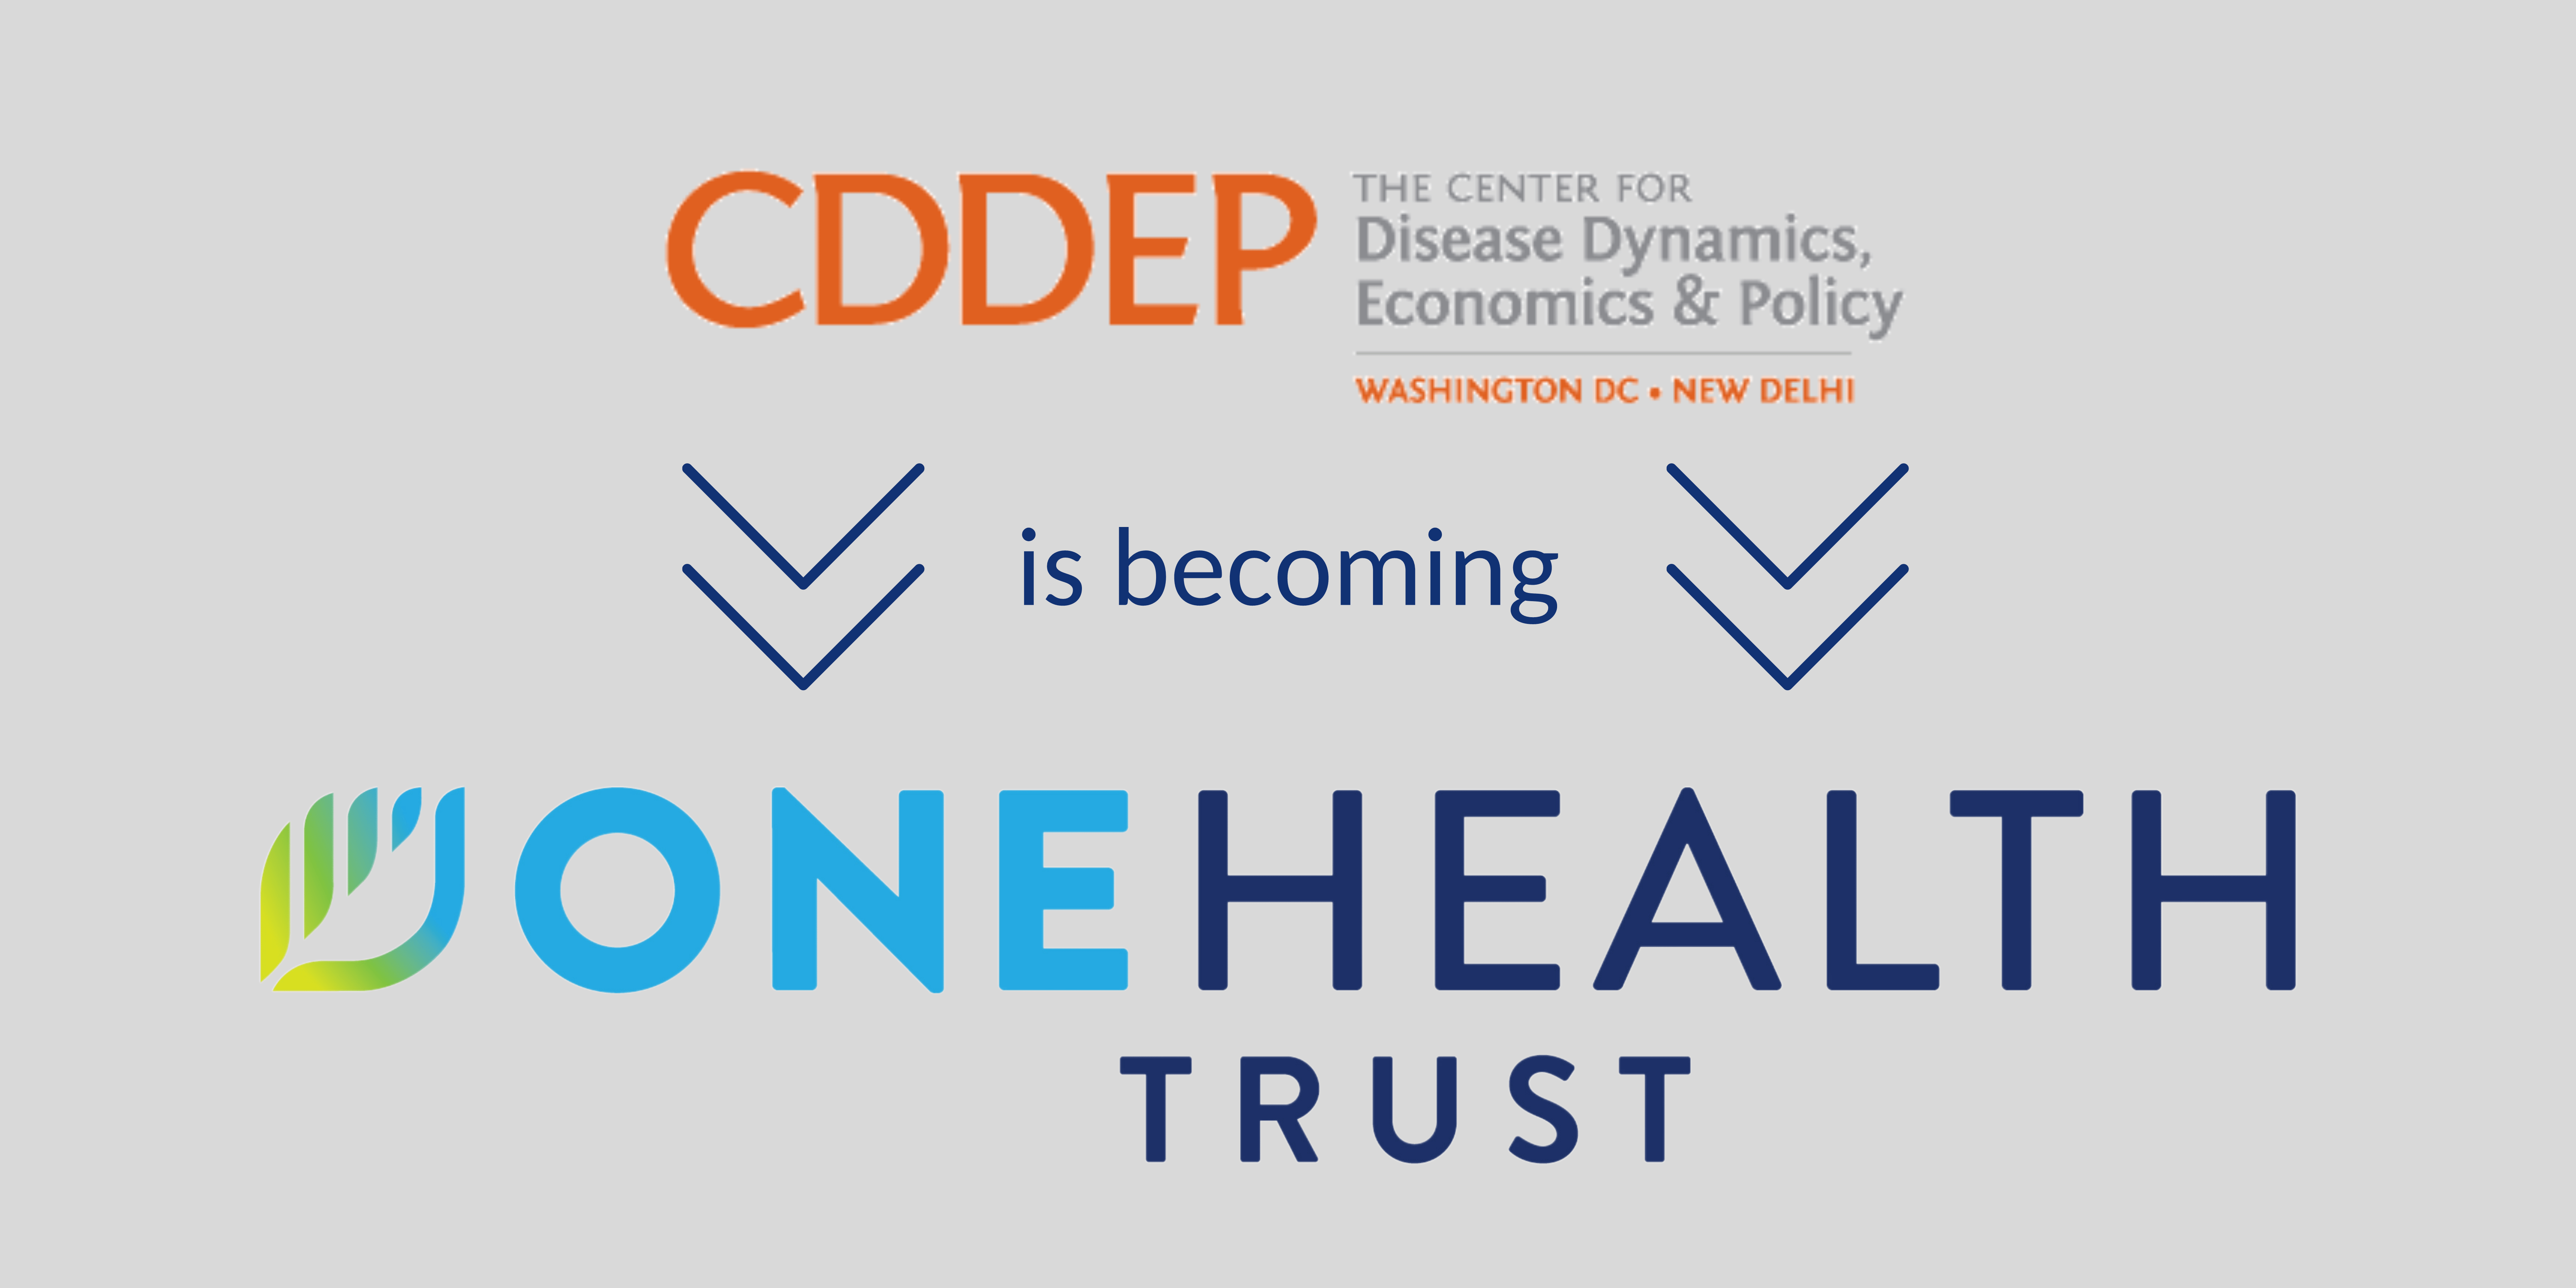 Banner with the CDDEP logo, with arrows below alongside the text "is becoming", directed toward the One Health Trust logo.